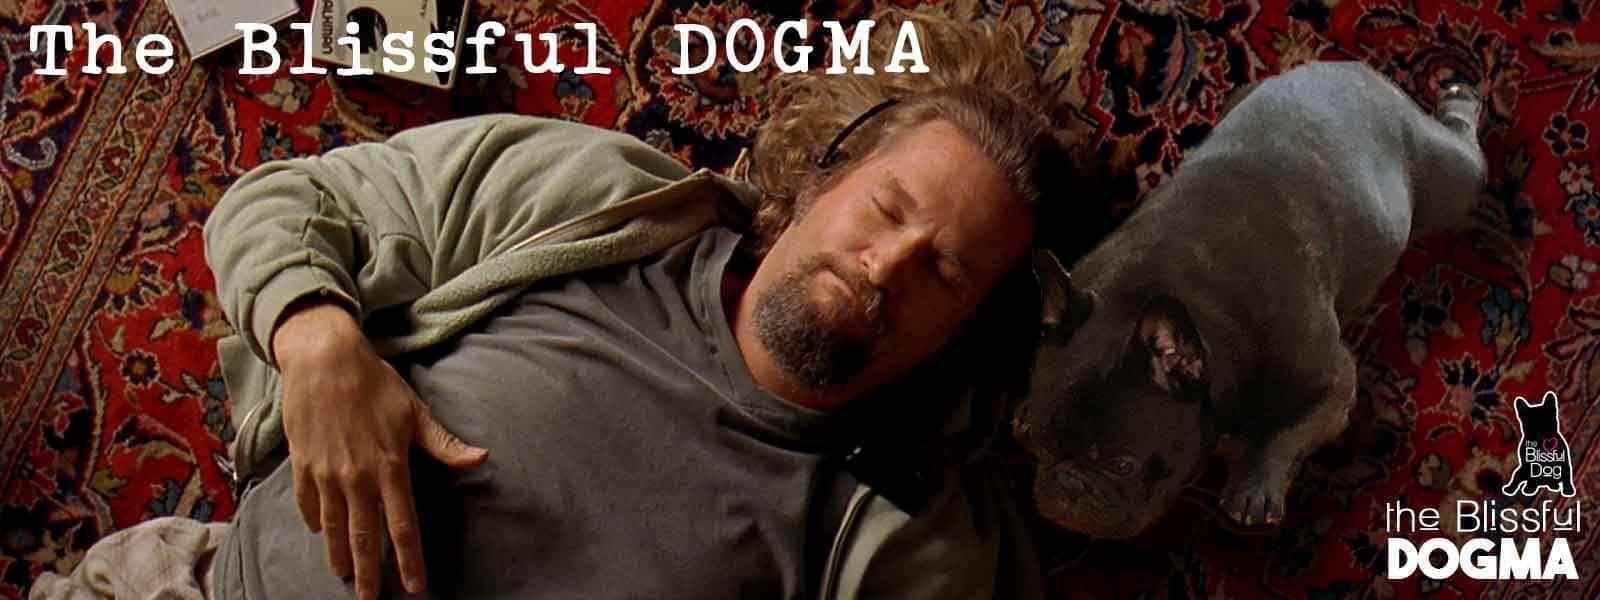 the blissful dogma abides